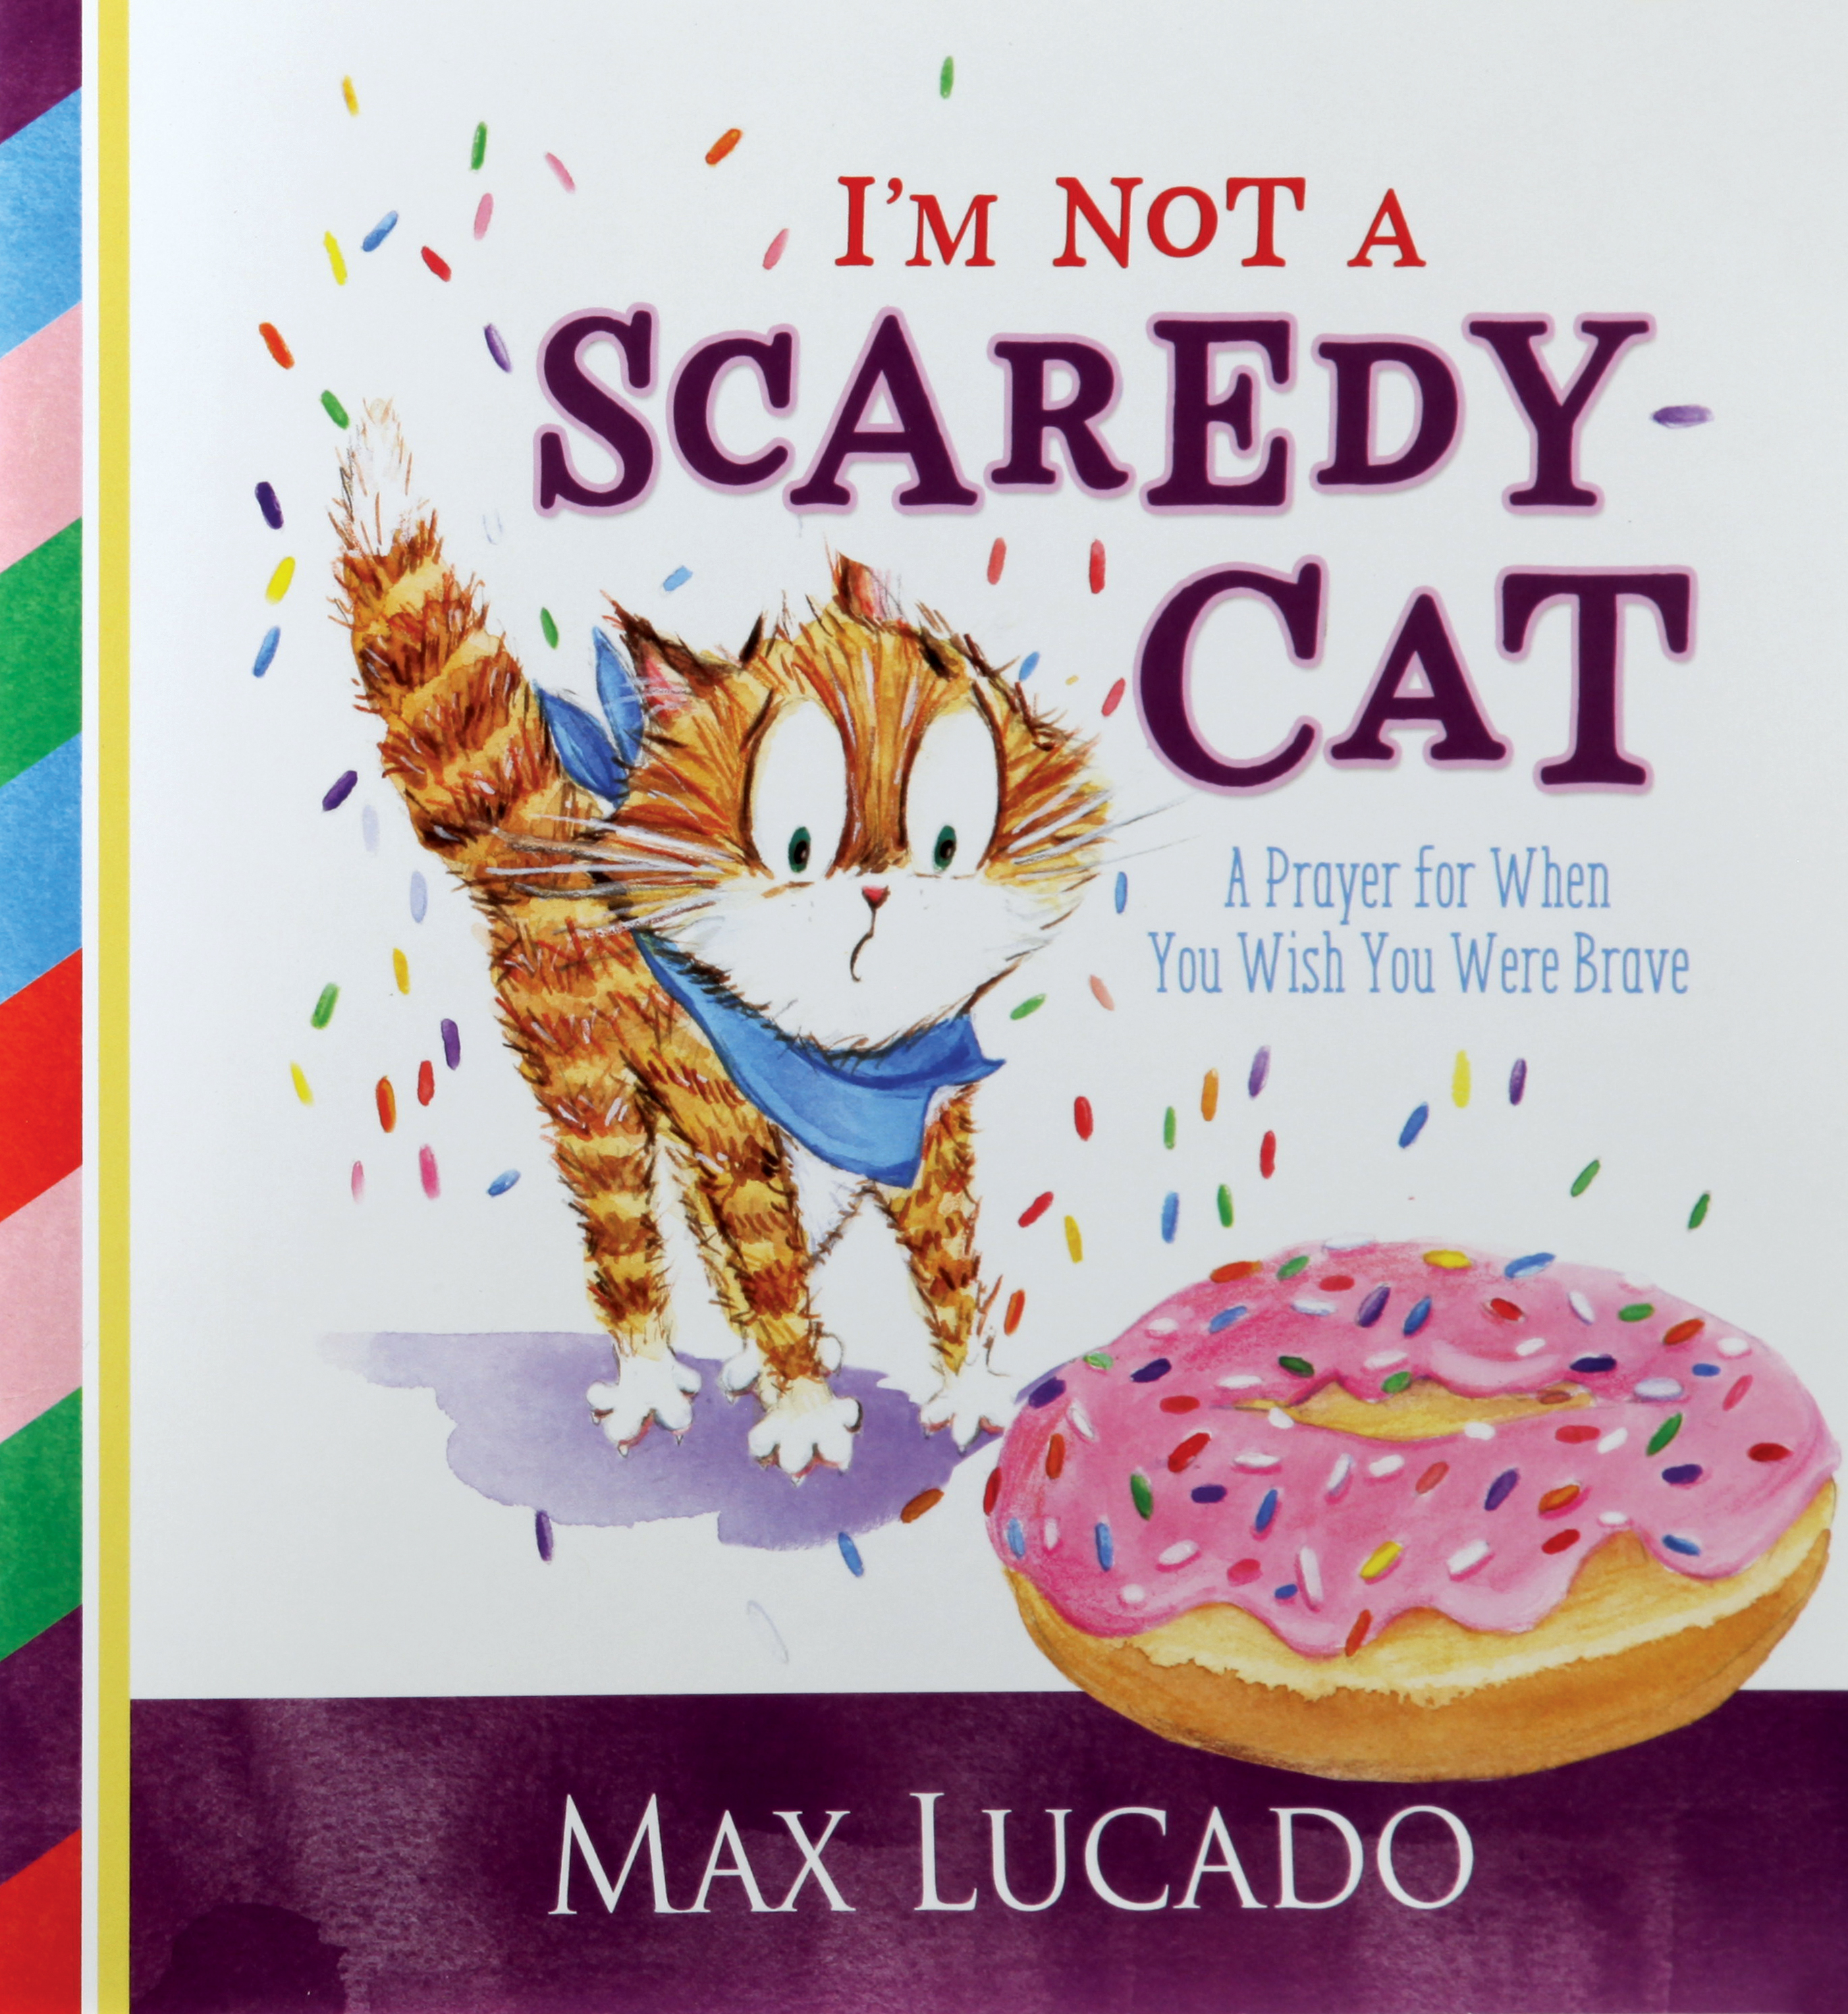 I'm Not a Scaredy Cat: A Prayer for When You Wish You Were Brave